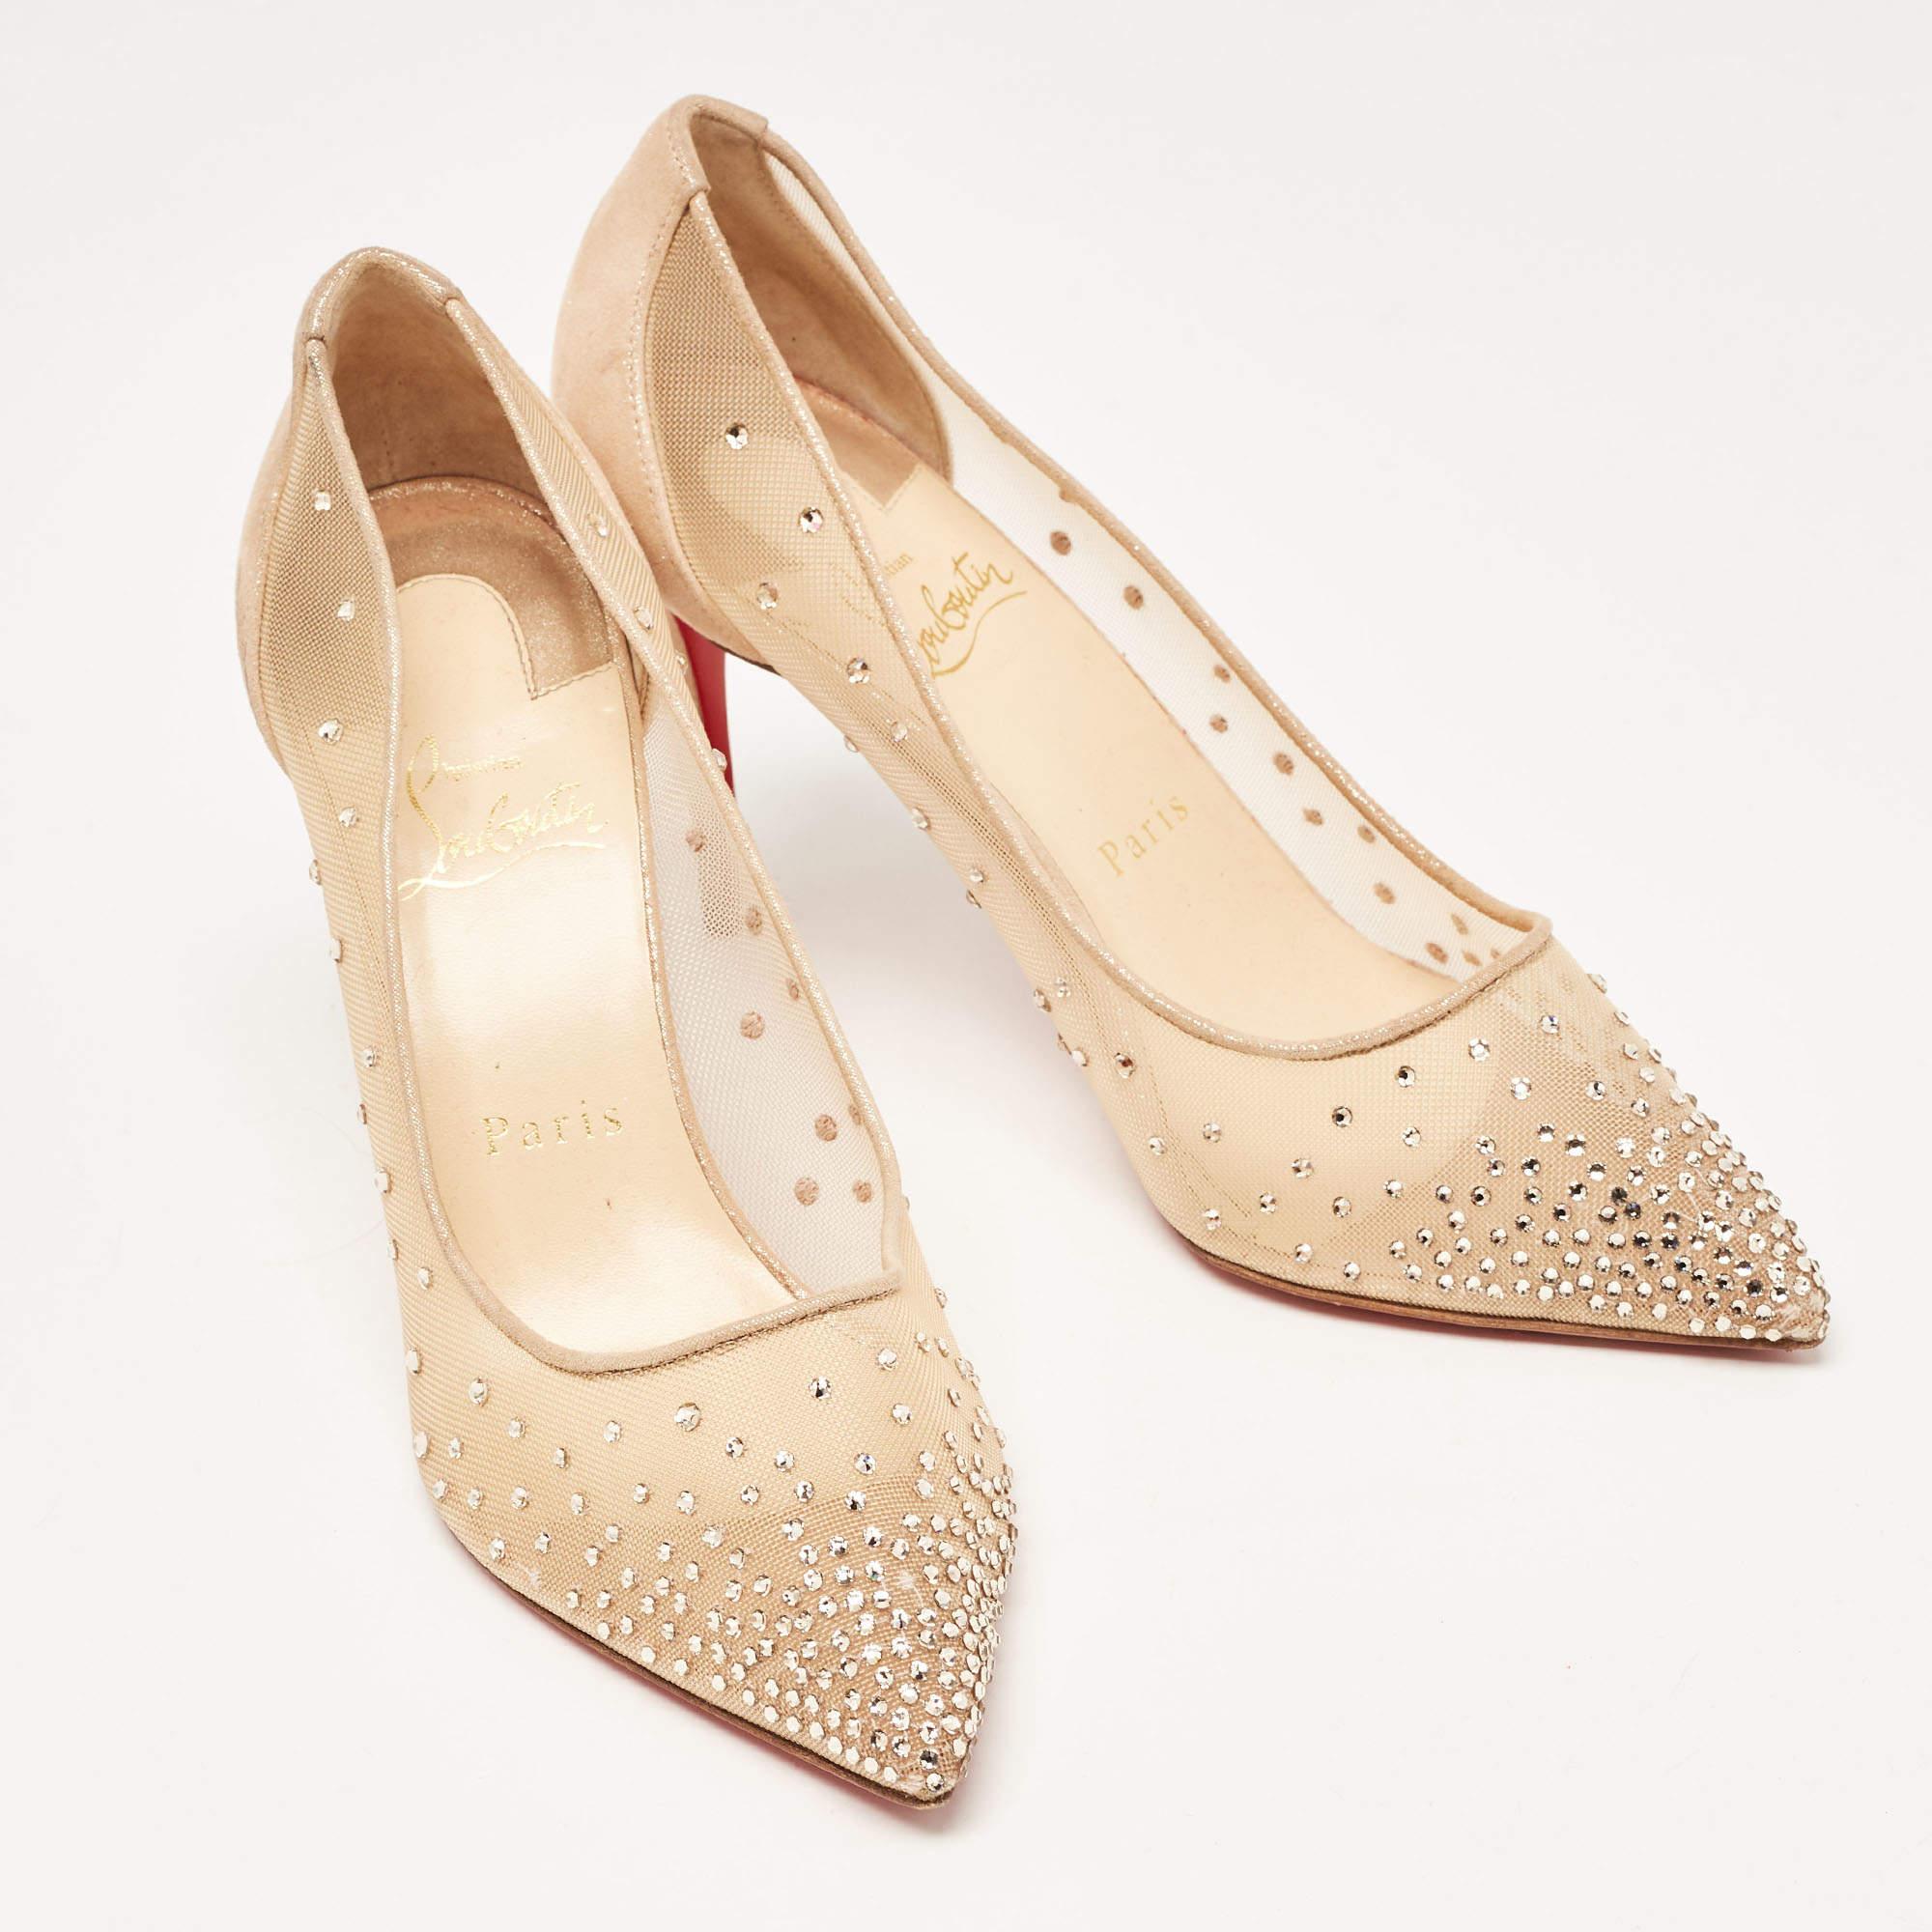 Women's Christian Louboutin Beige Mesh and Laminated Suede Follies Strass Pumps Size 37.